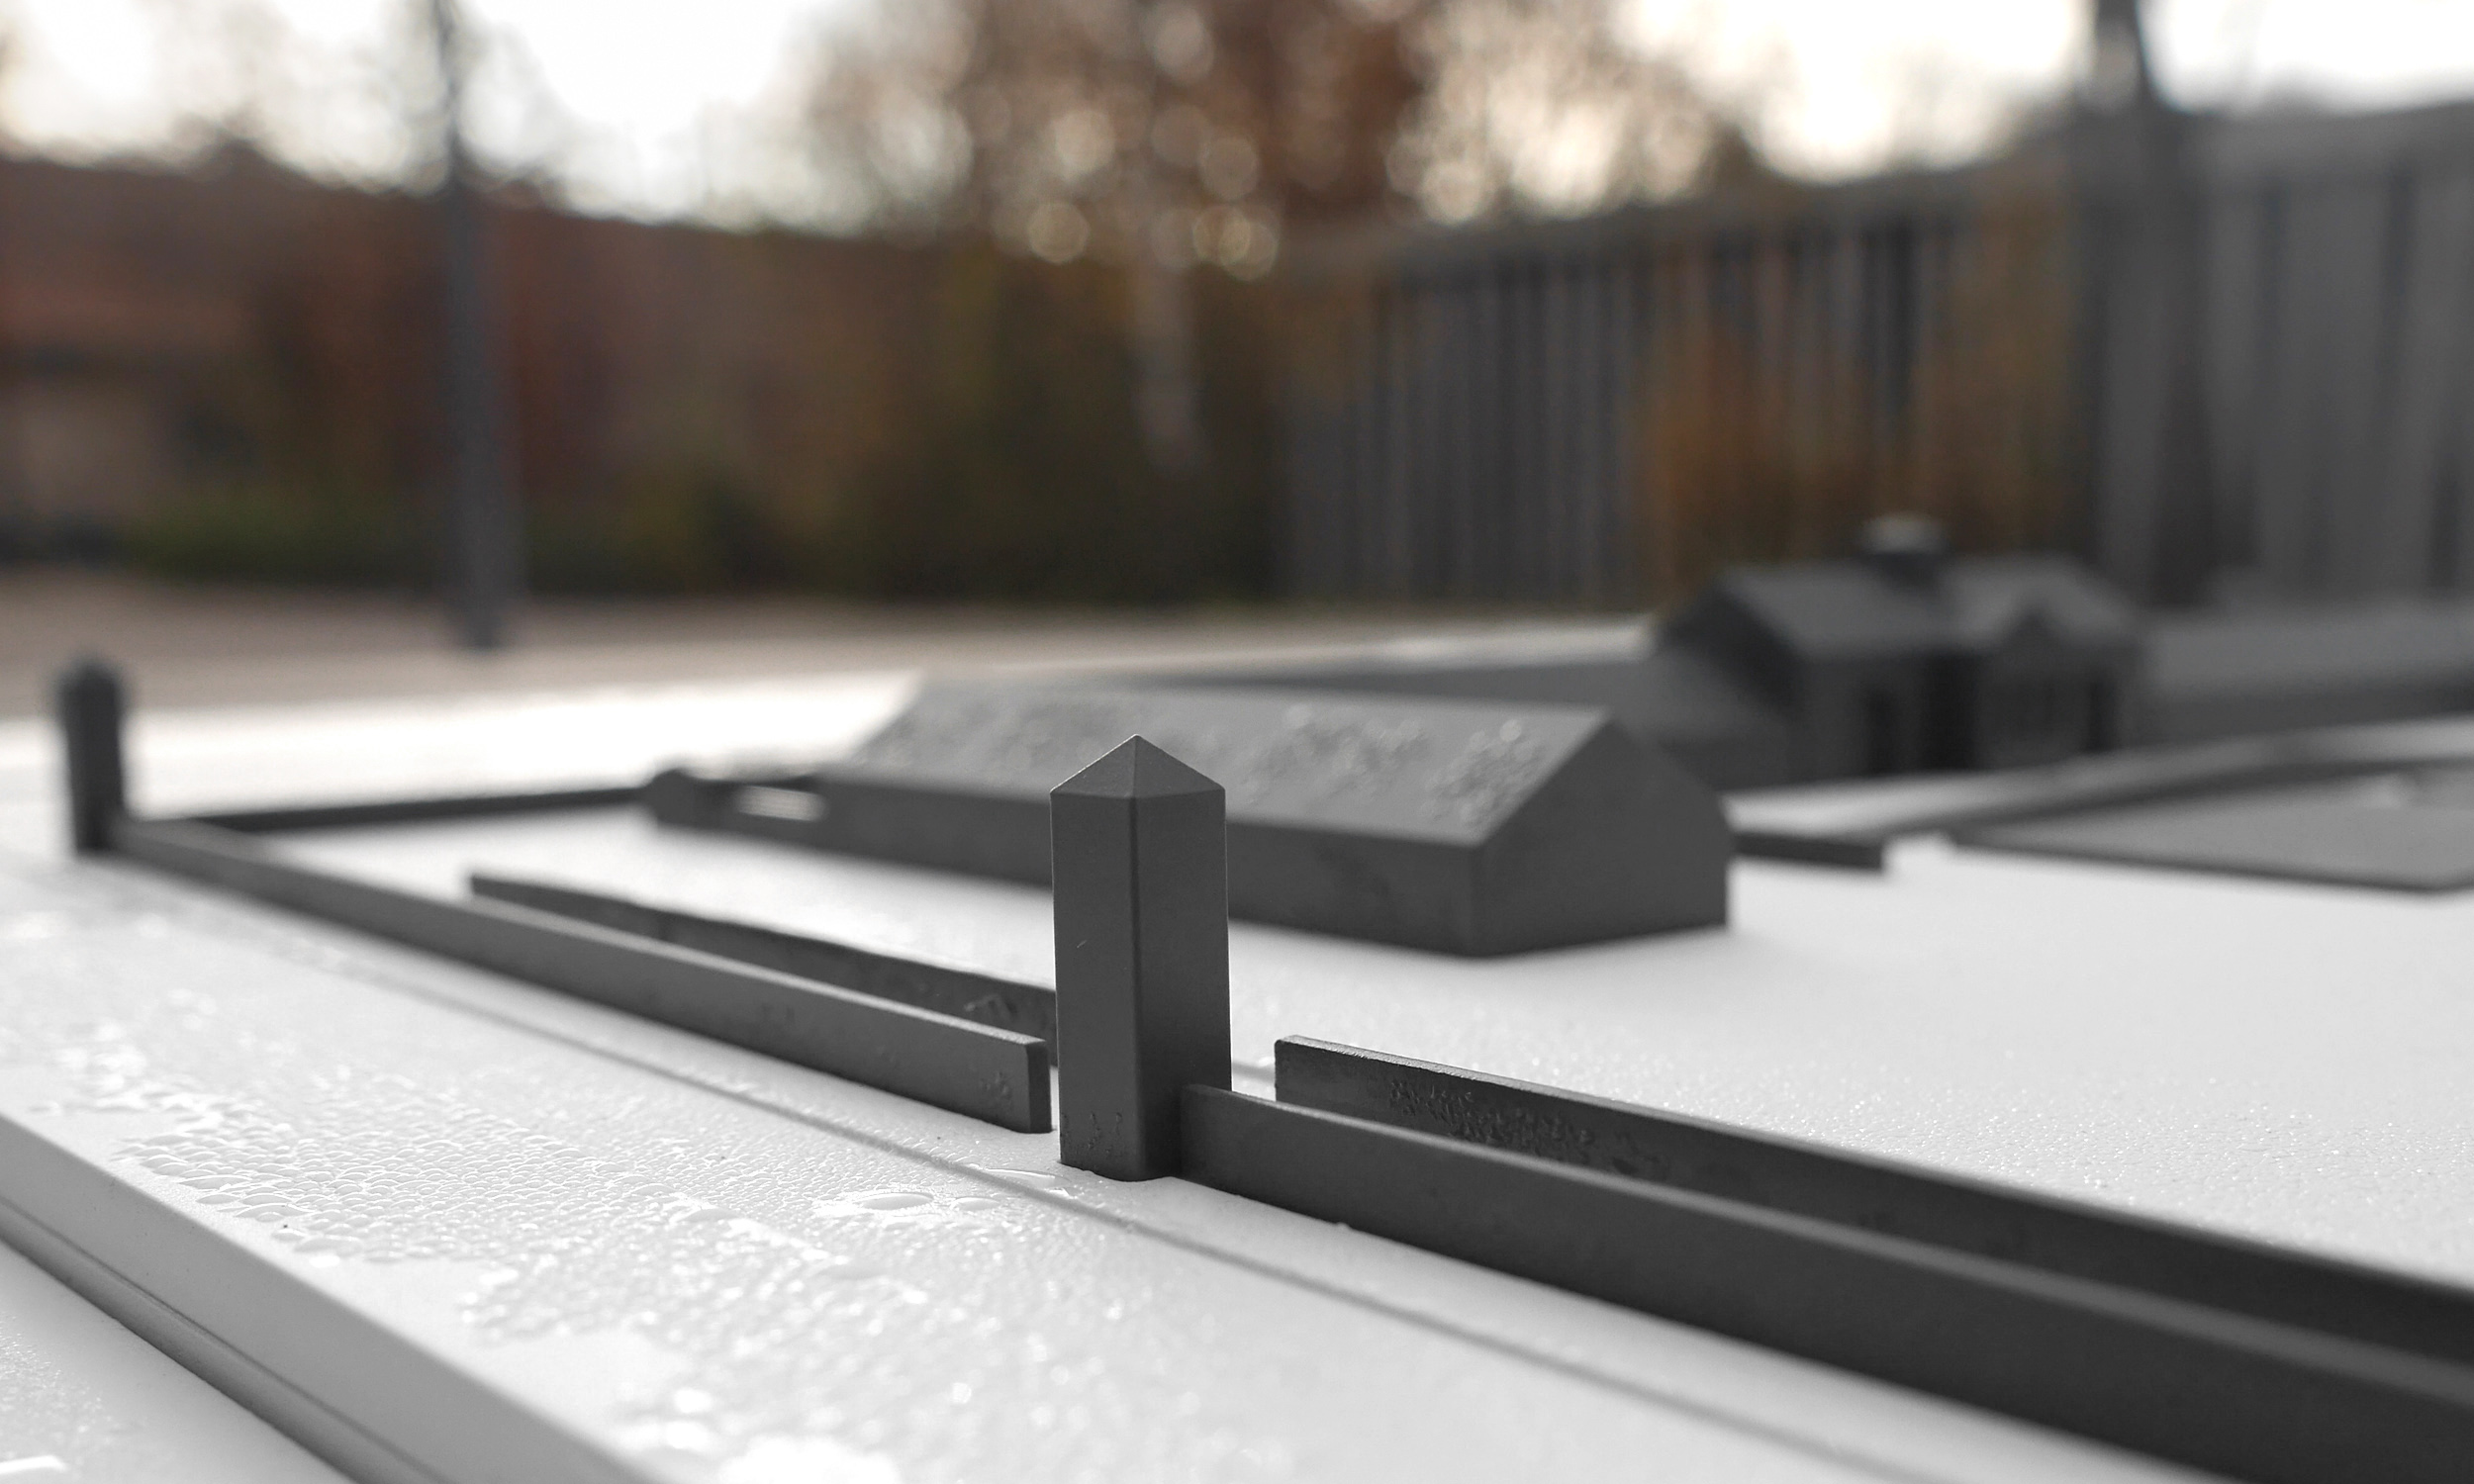 Detail photo of a tactile model with guard towers of the concentration camp in the foreground